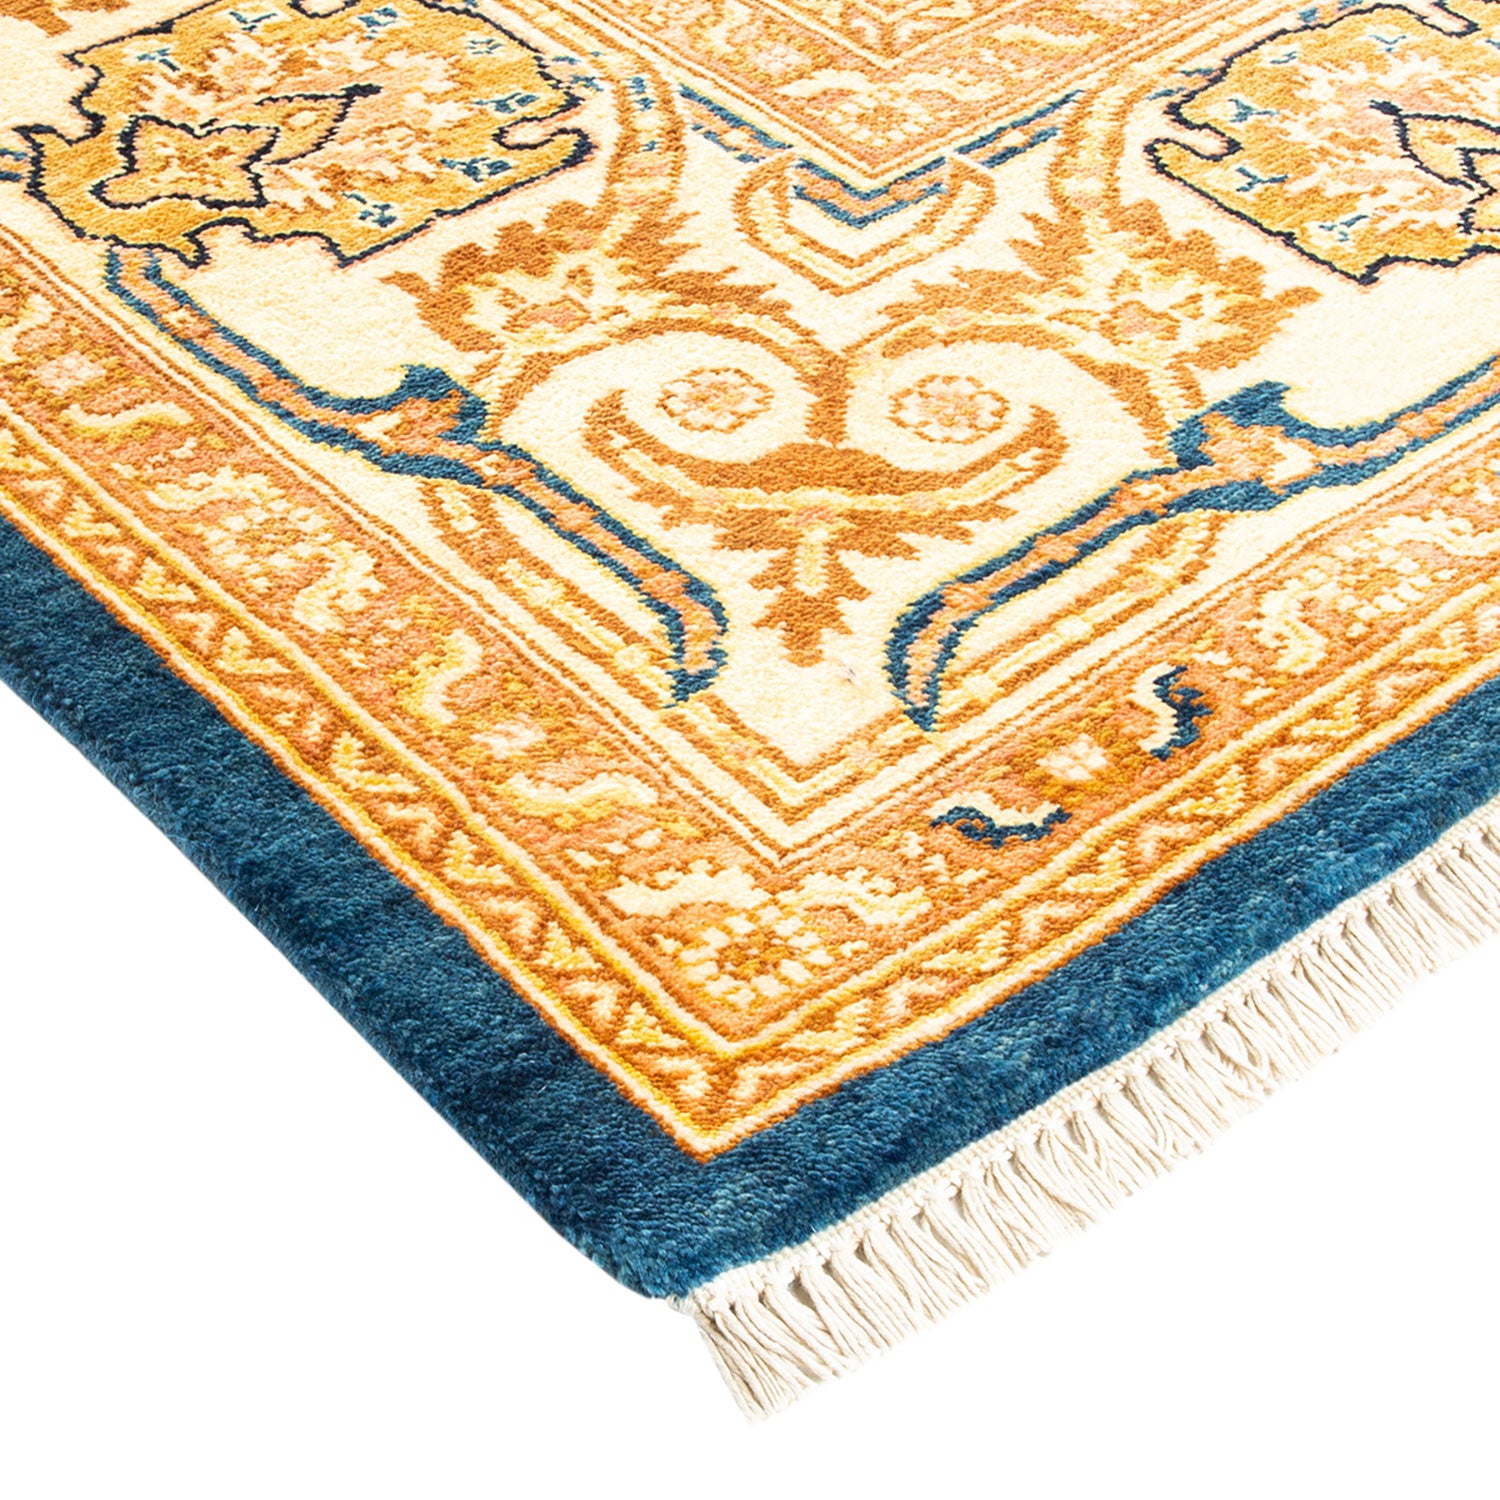 Exquisite and luxurious Persian rug with intricate golden and blue patterns.